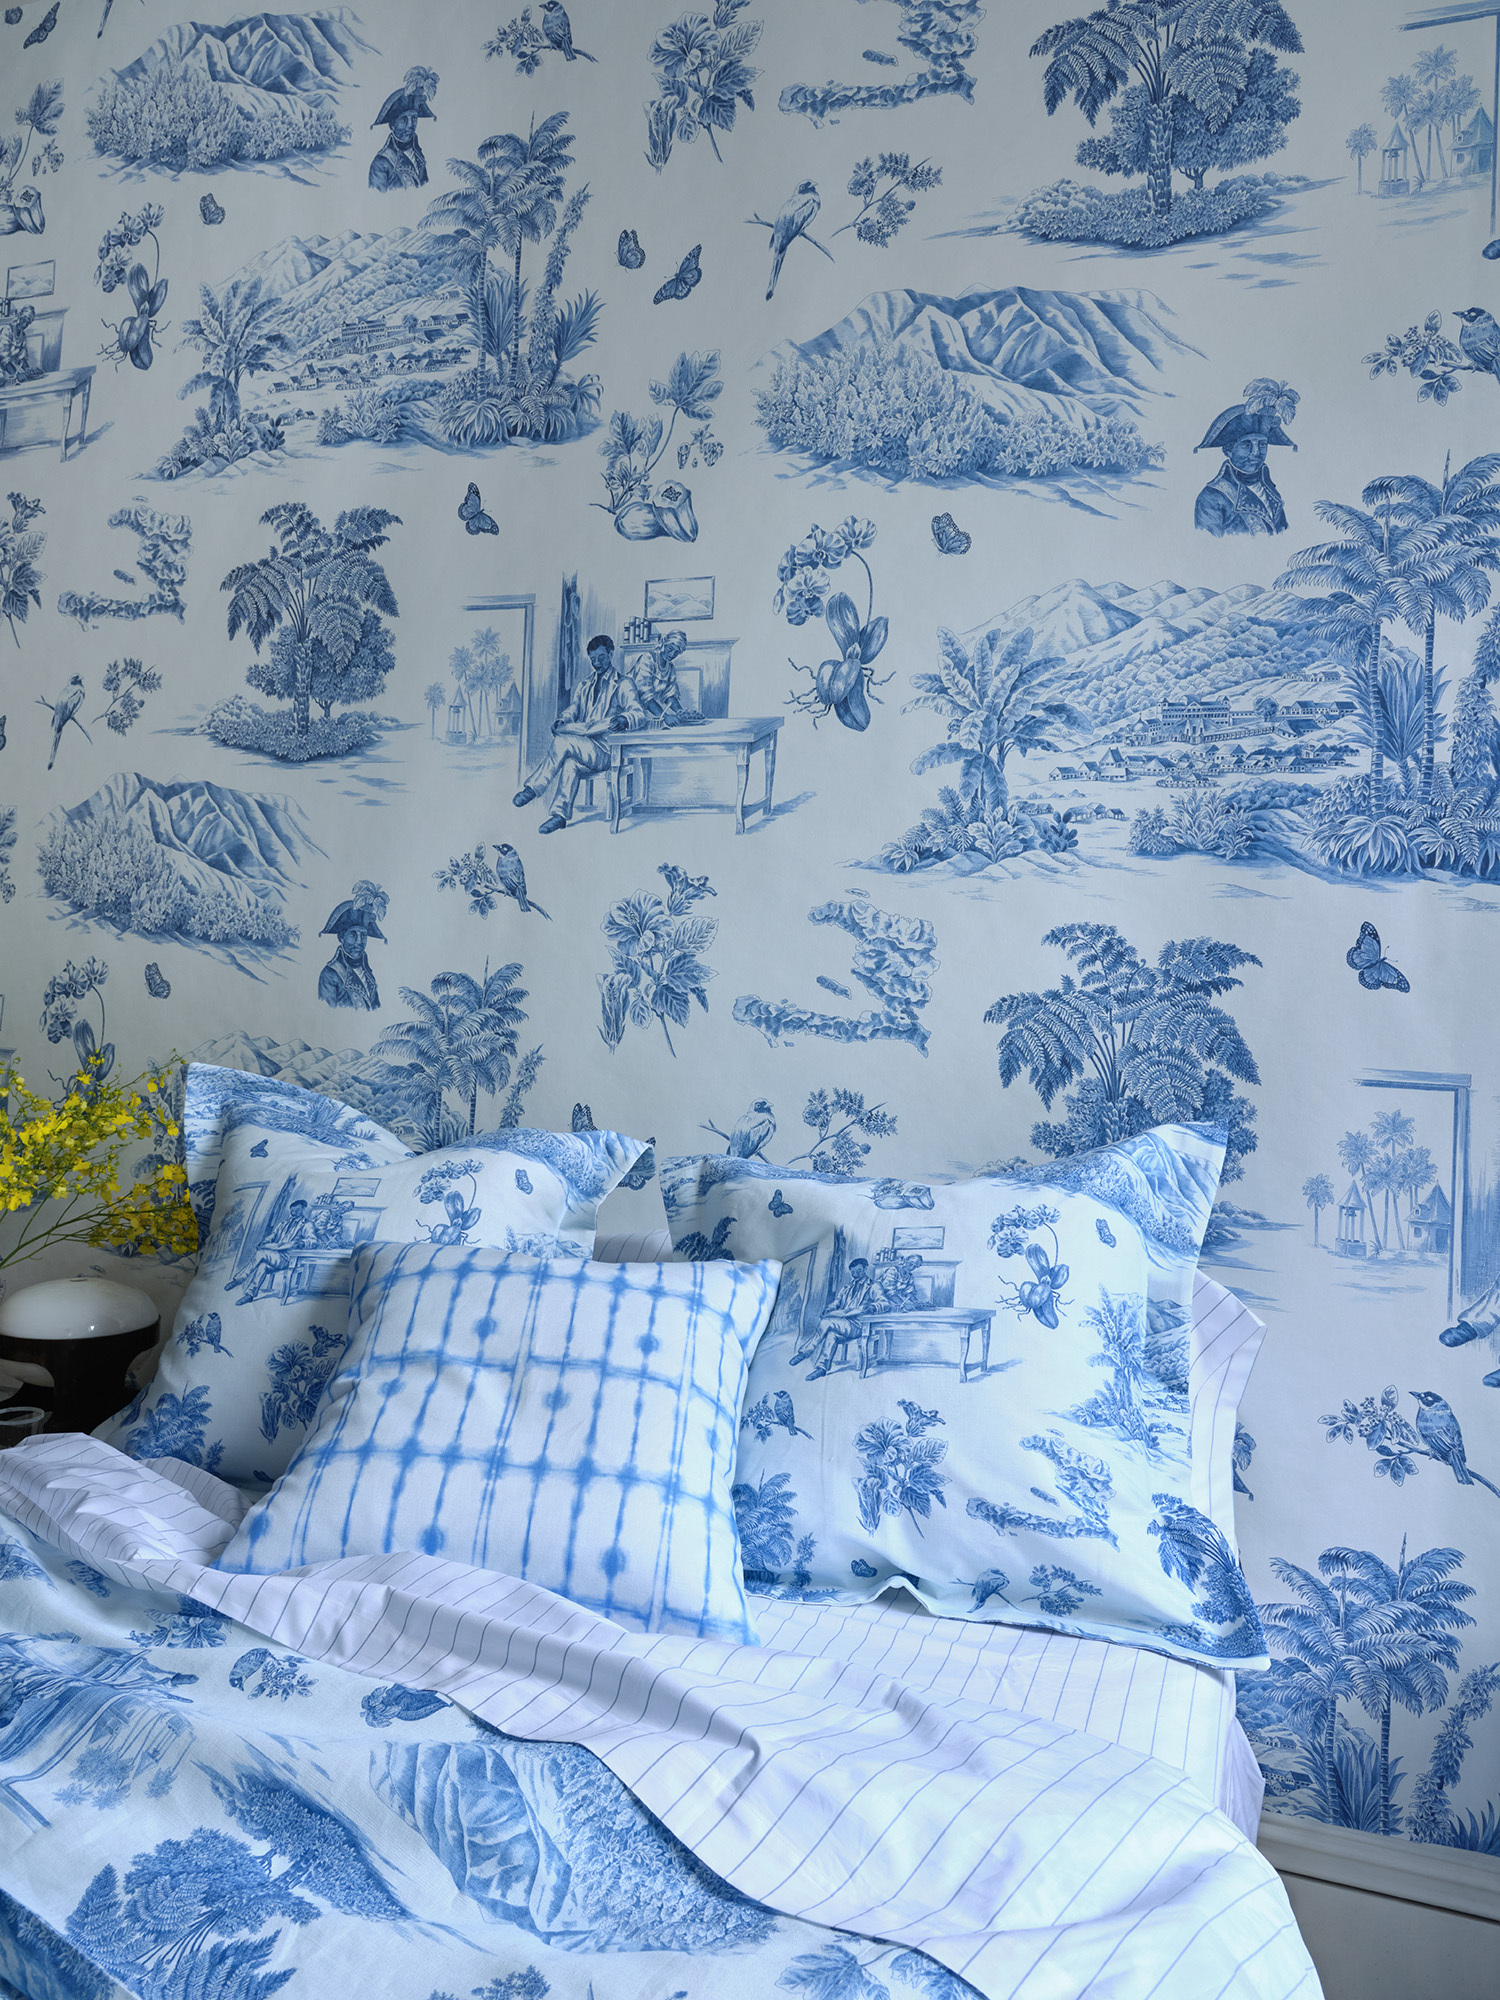 The High-Fashion History of Toile de Jouy